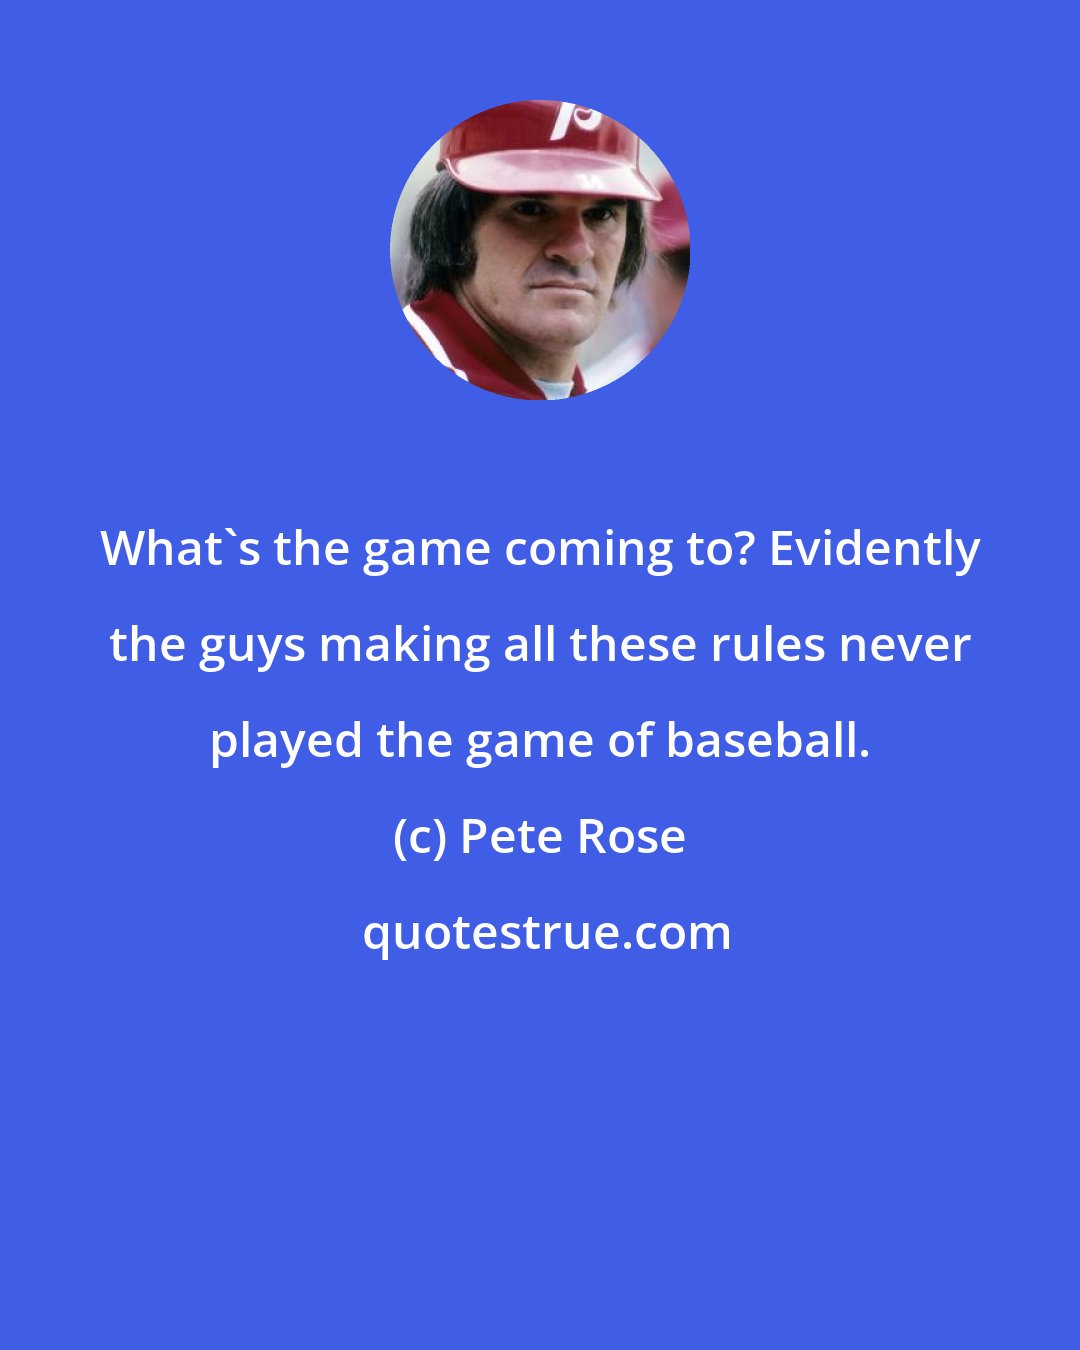 Pete Rose: What's the game coming to? Evidently the guys making all these rules never played the game of baseball.